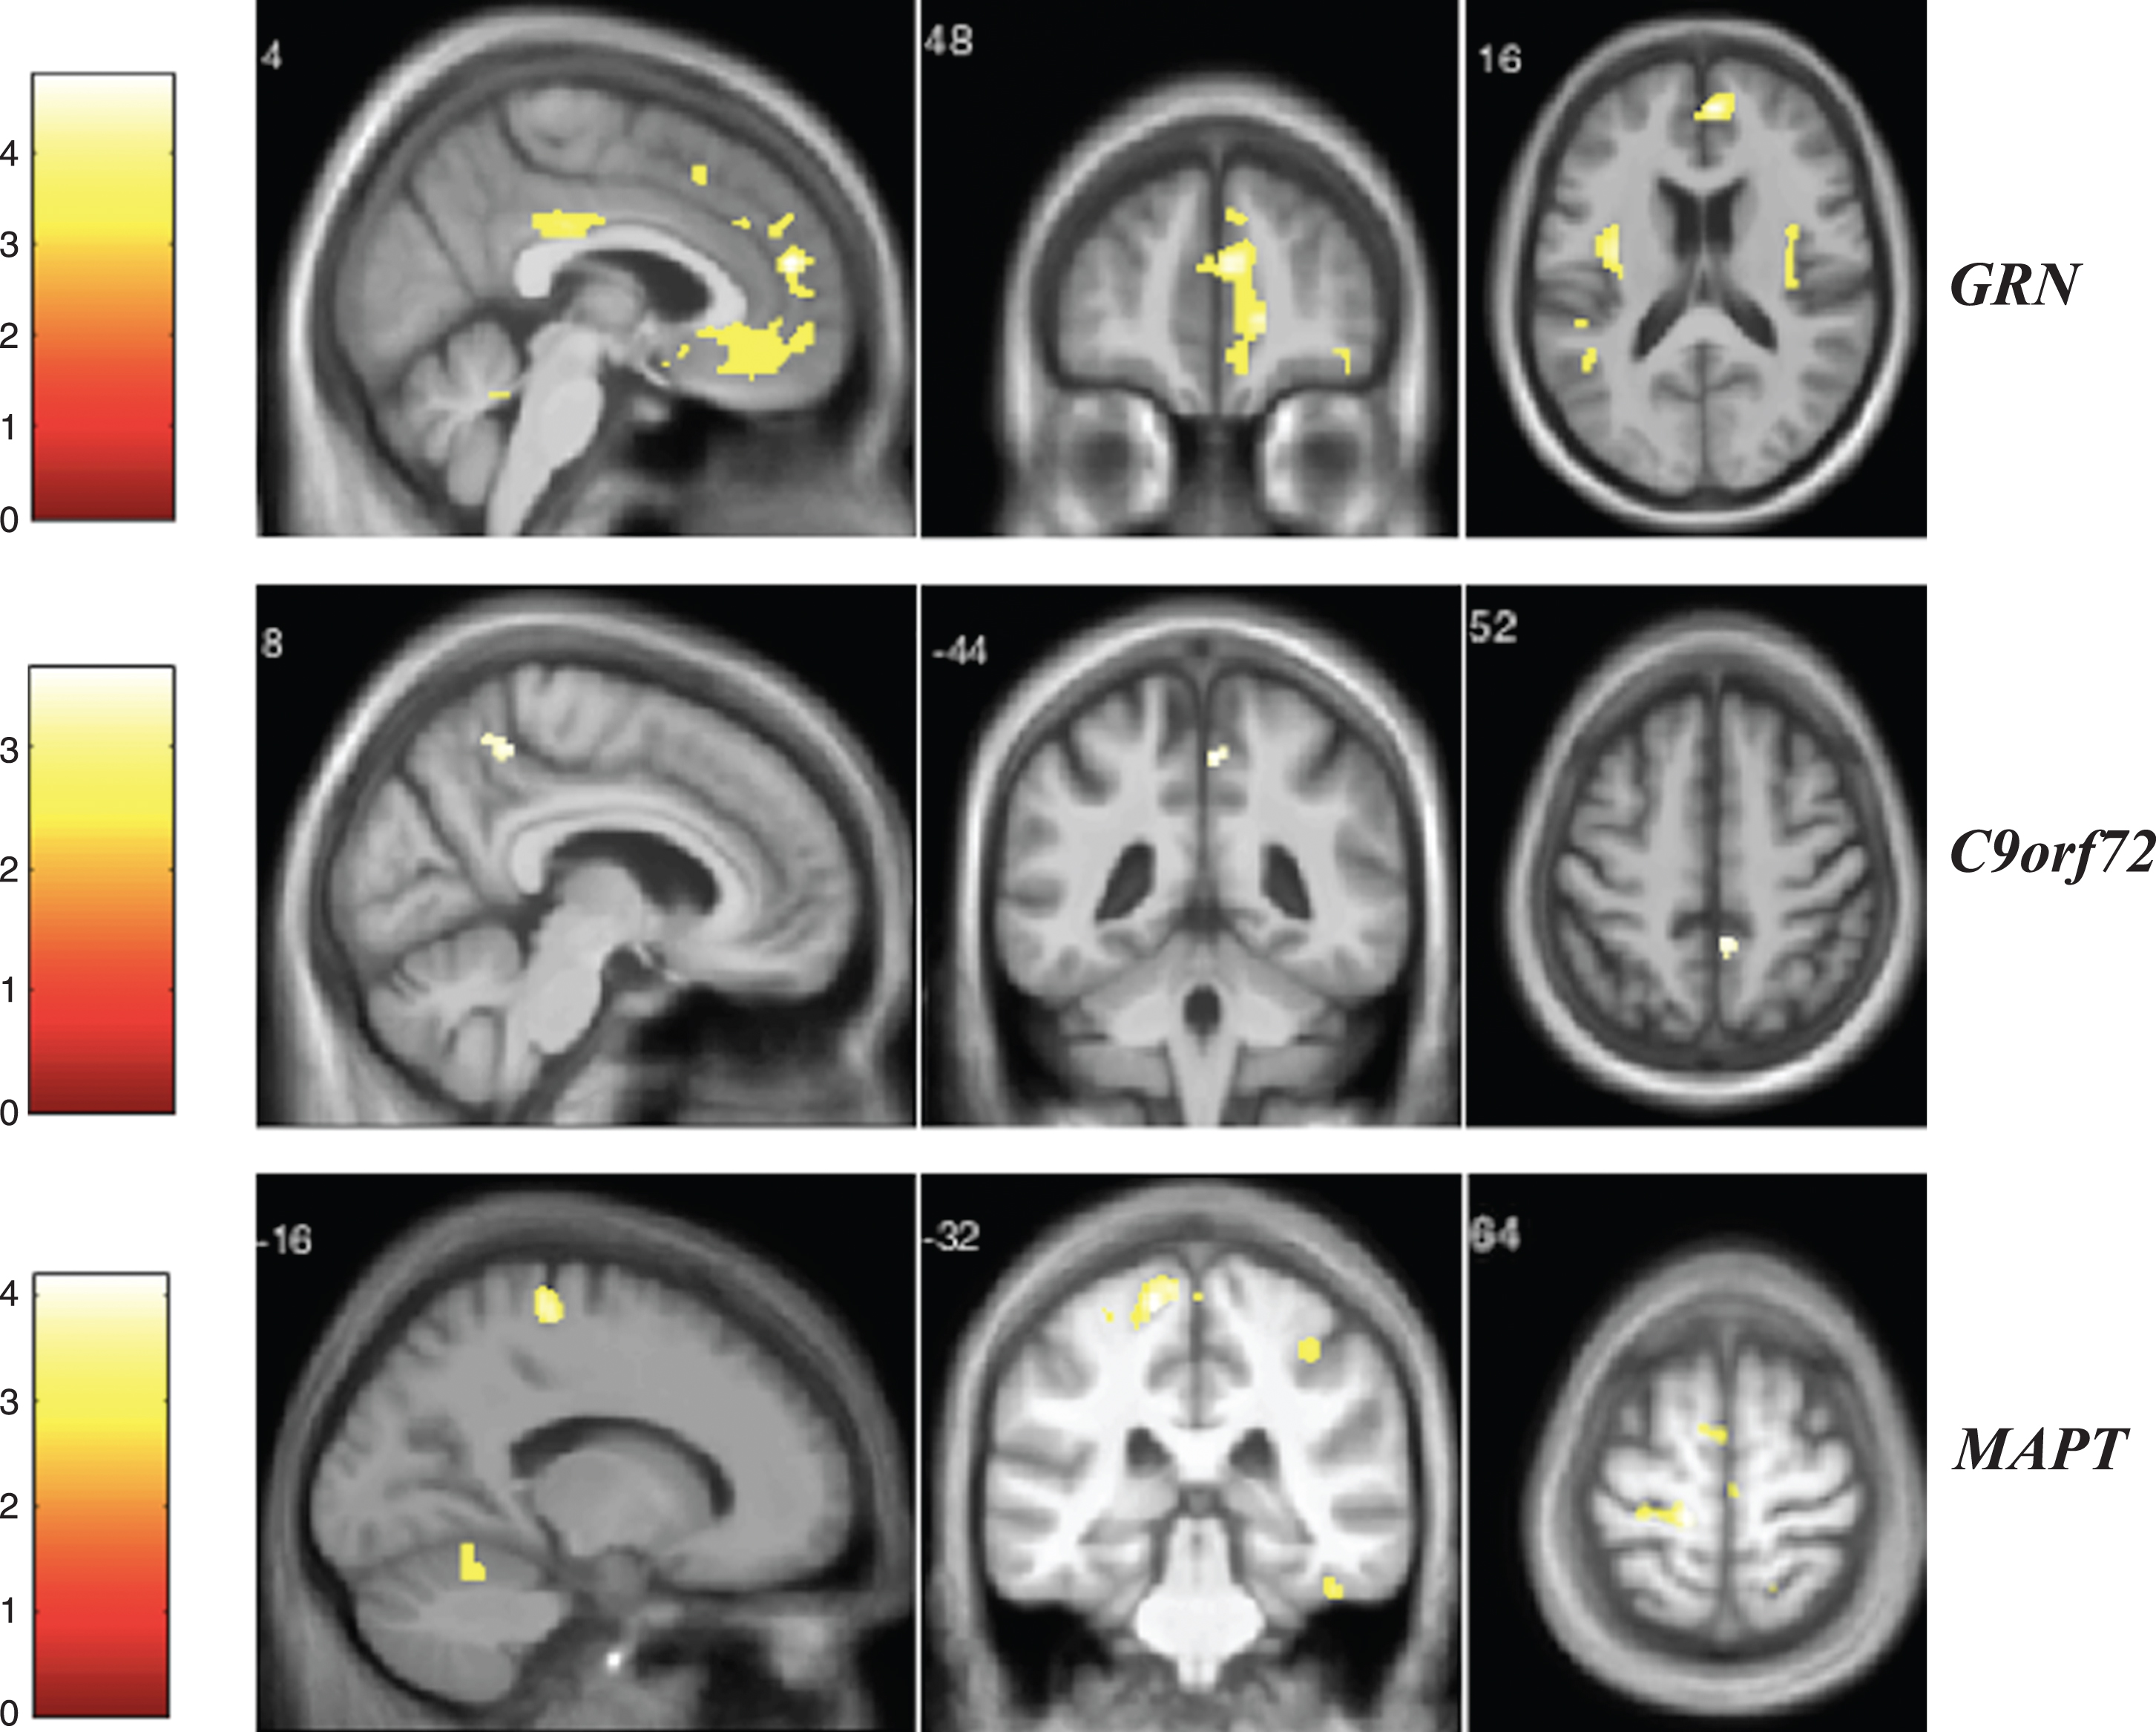 VBM analysis showing areas of significant correlation between the presence and severity of depression and GM density across the FTD genetic groups. Statistical parametric maps were thresholded at p < 0.001 uncorrected and rendered on a study-specific T1-weighted MRI template in MNI space. Analyses were adjusted for age, gender, total intracranial volume, and scanner type. The color bar indicates the Z-scores.